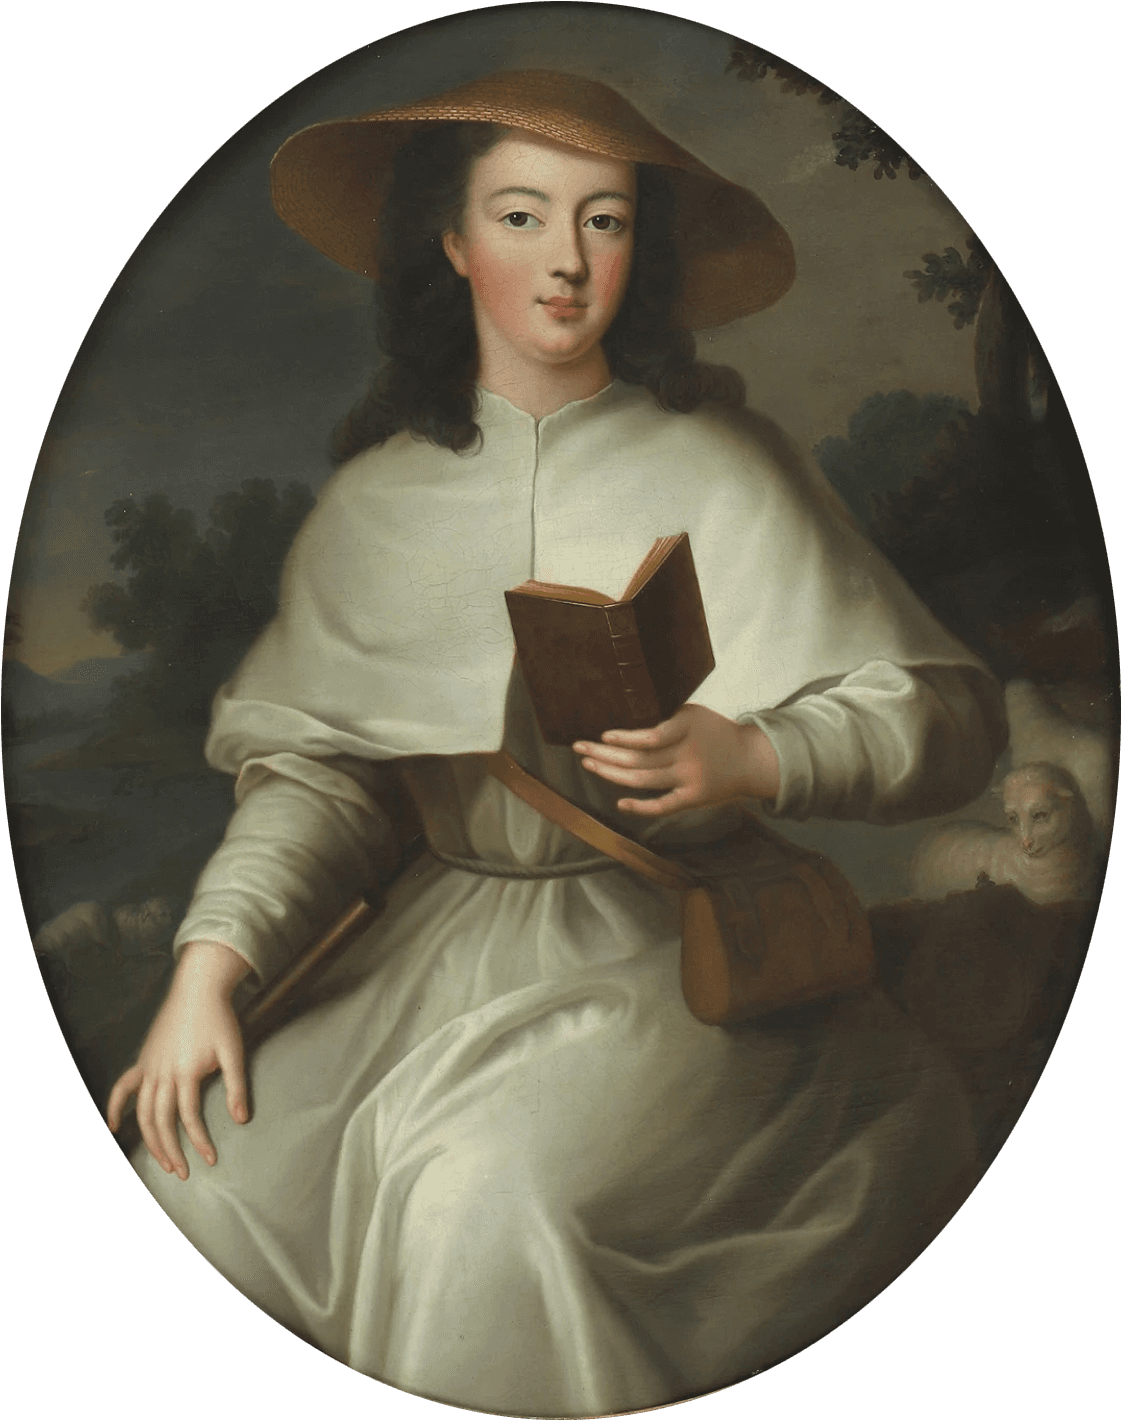 A portrait of a lady with a straw hat, 18th century, by a follower of Pierre Gobert. Oil on canvas. (Public Domain)